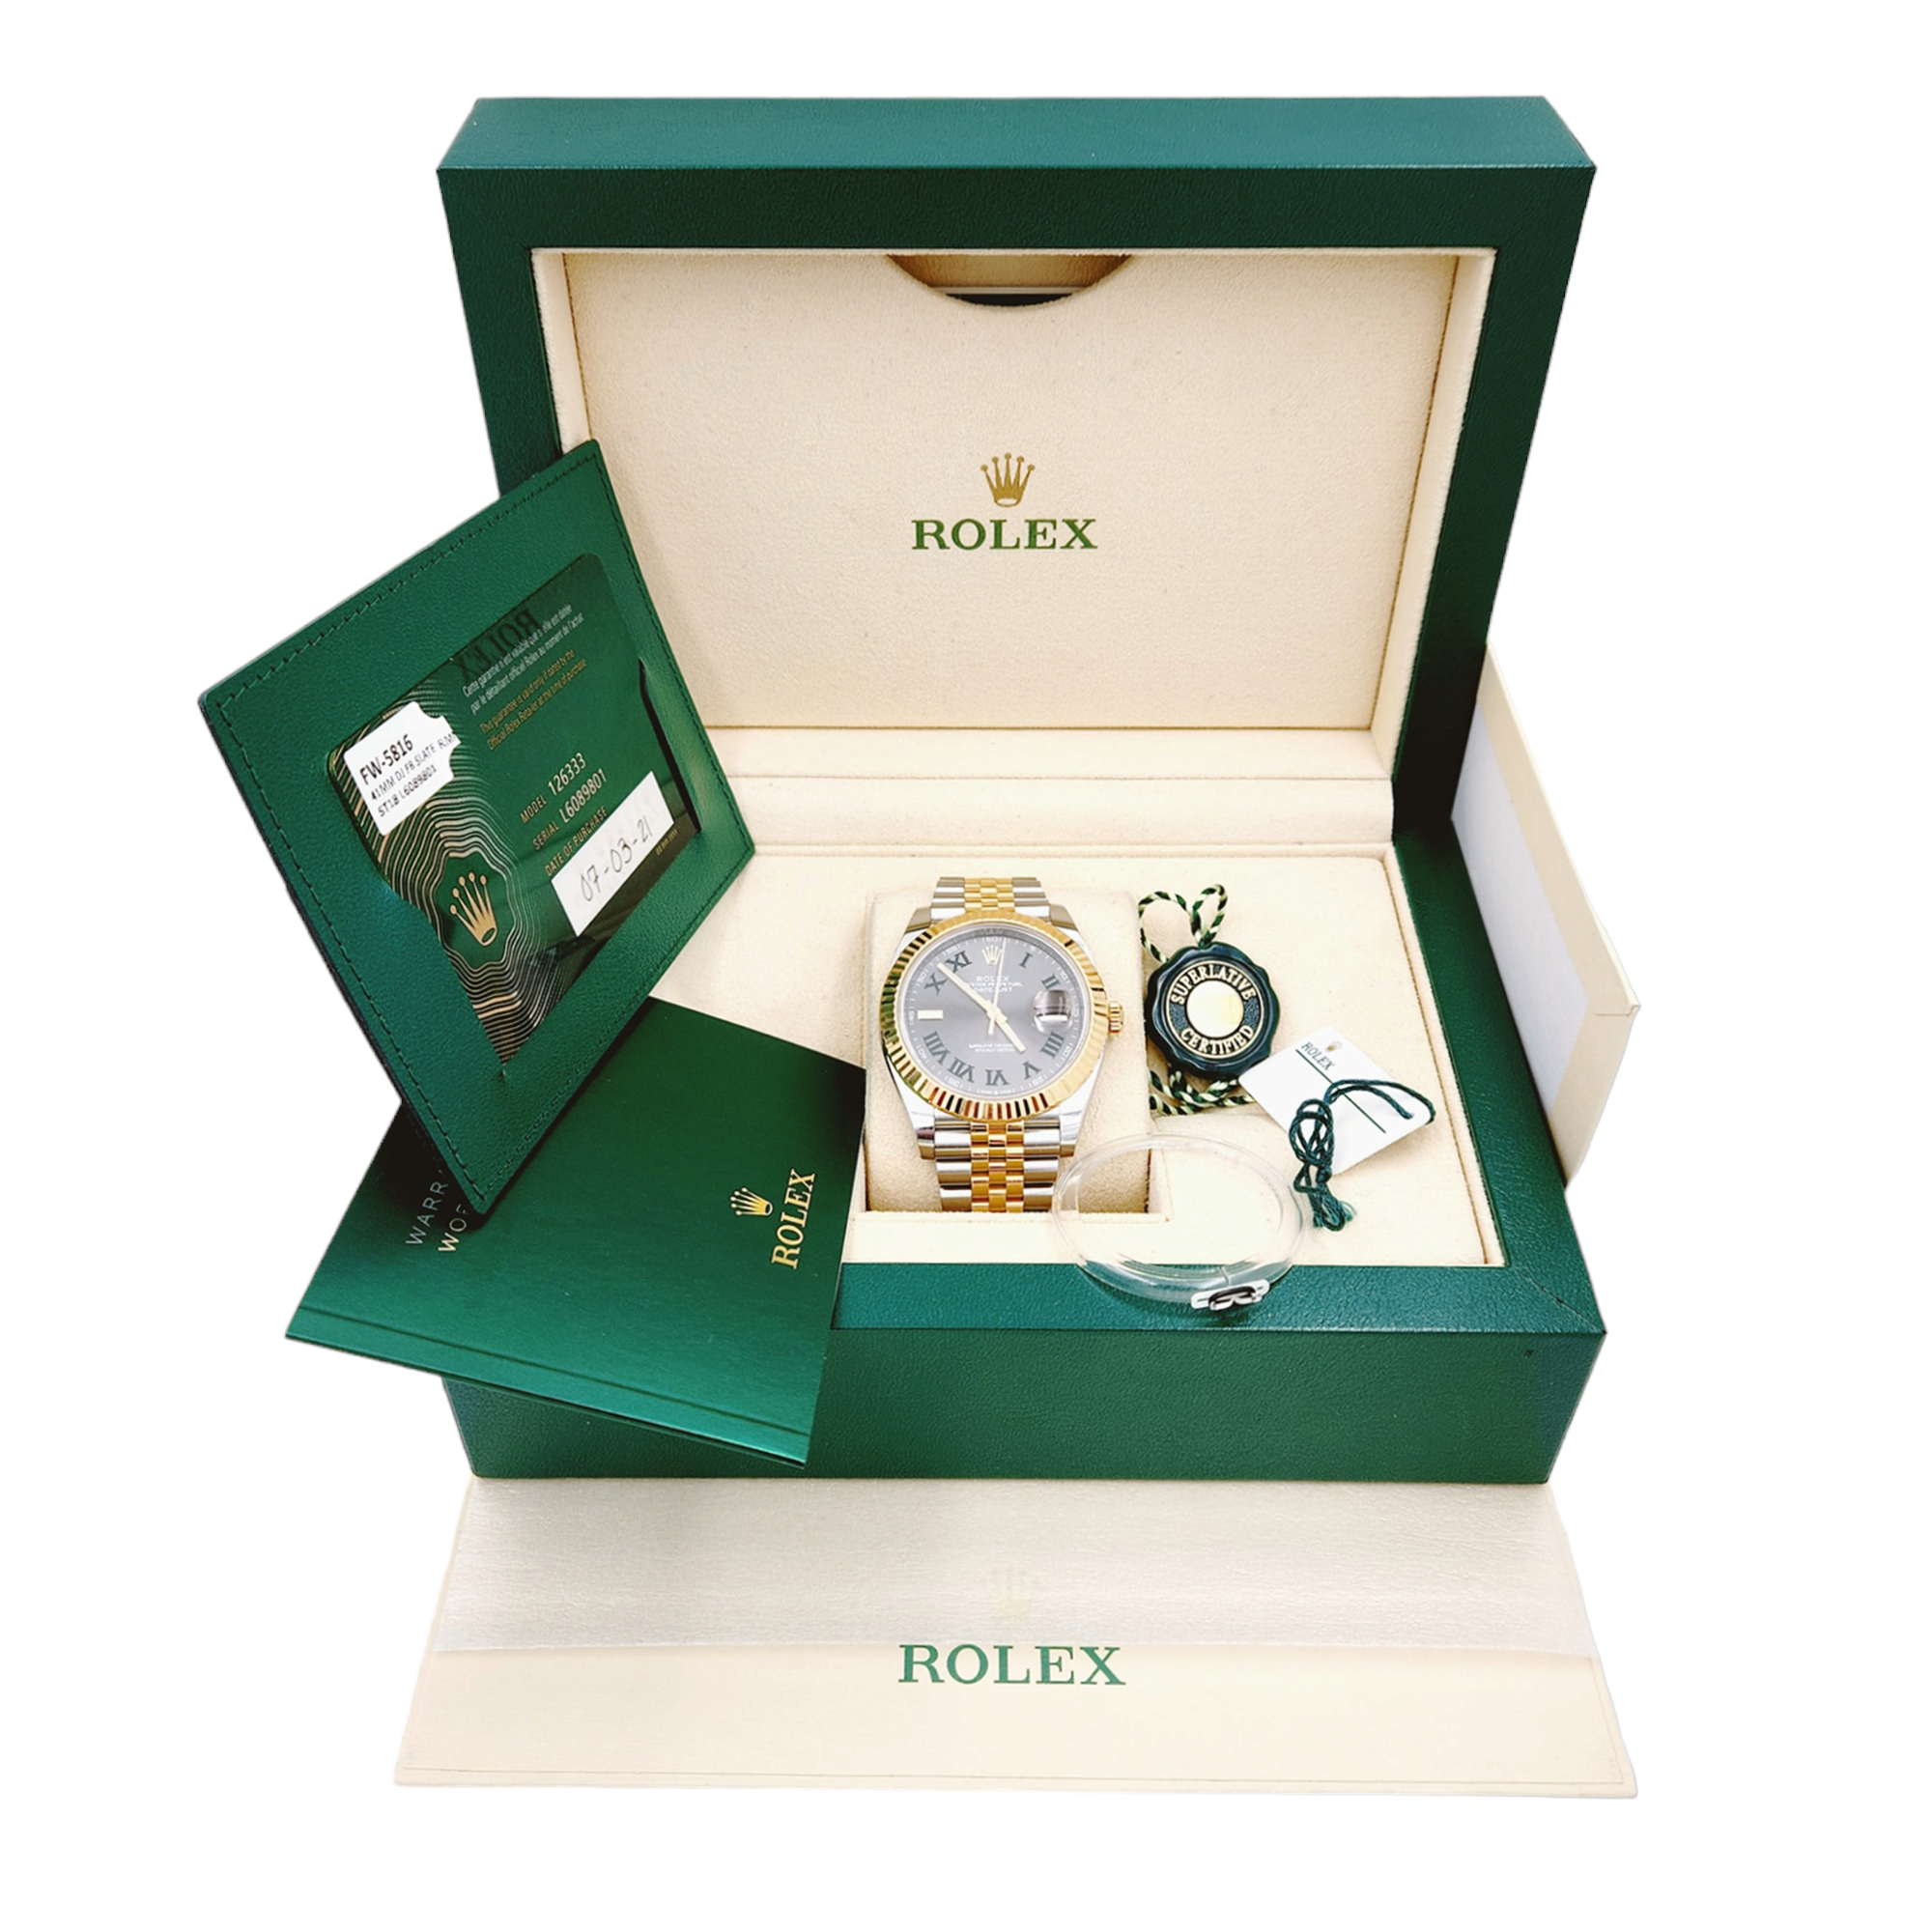 2021 Men's Rolex 41mm DateJust Two Tone 18K Yellow Gold / Stainless Steel Watch with Green Numeral / Silver Dial and Fluted Bezel. (Pre-Owned 126333)